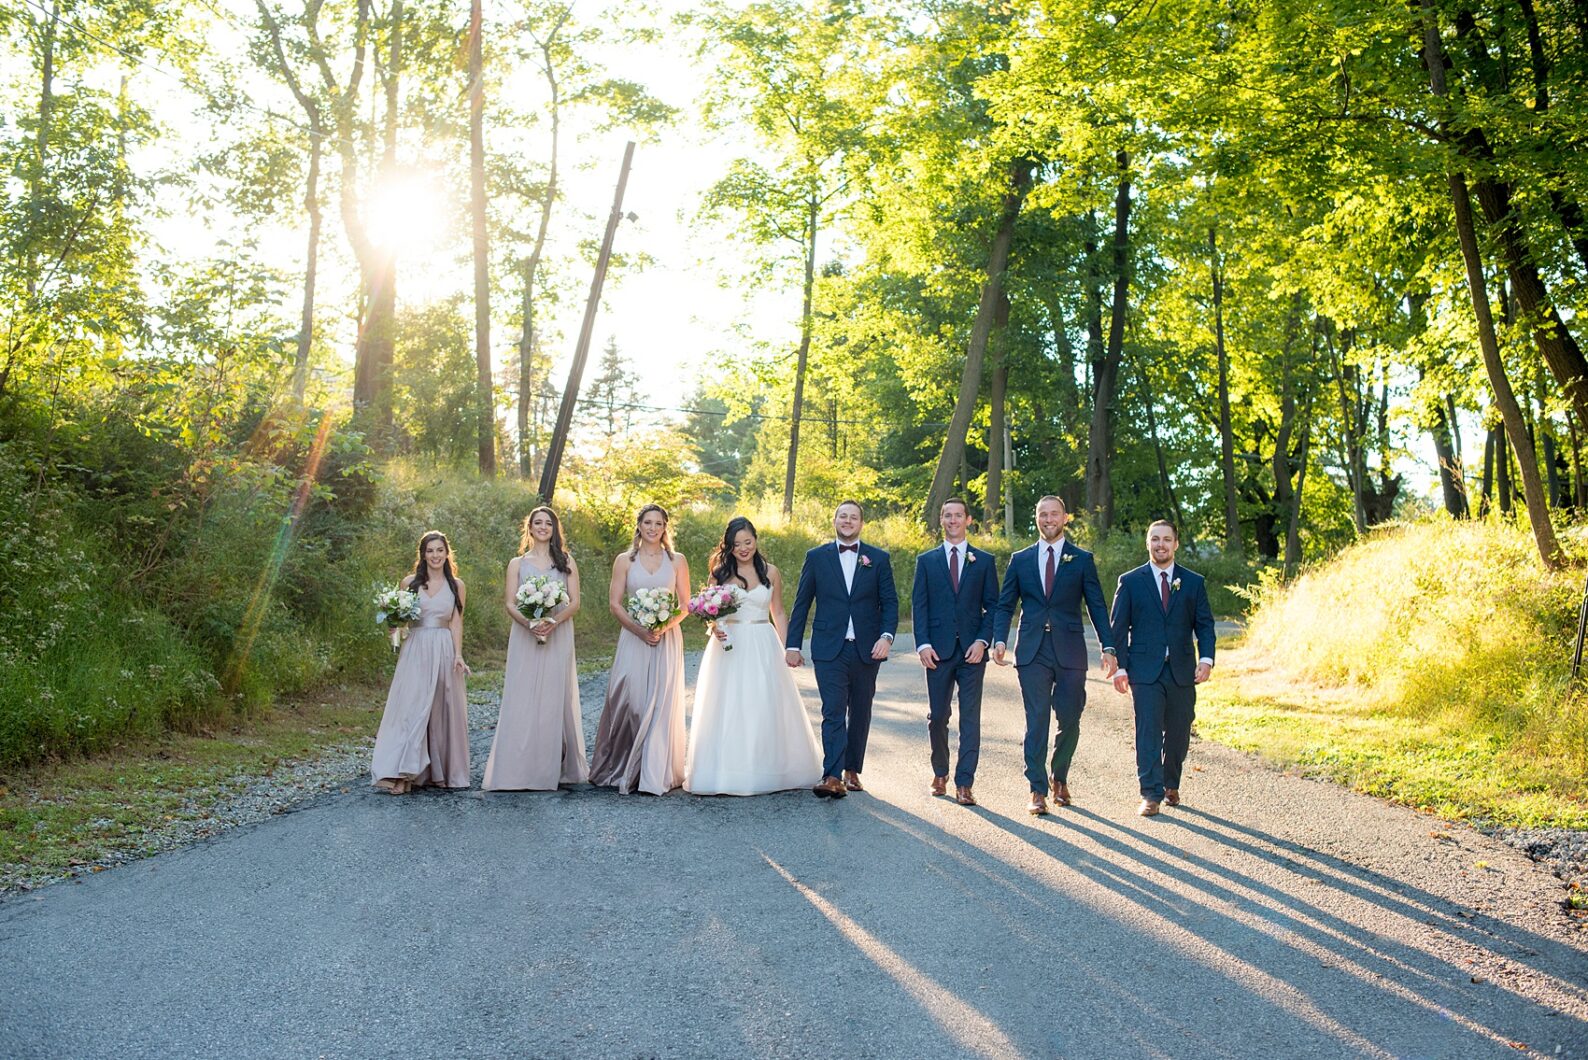 Wedding photos at Crabtree's Kittle House in Chappaqua, New York by Mikkel Paige Photography. This venue in Westchester county is the perfect place for a September wedding. Golden hour shone down on the bridal party in dusty rose gowns and groomsmen in navy blue suits. Click through for more wedding photos from the day! #navybluesuit #mikkelpaige #CrabtreesKittleHouse #WestchesterWeddingVenues #WestchesterWedding #Septemberwedding #weddingparty #BridalParty #goldenhour #dustyrose